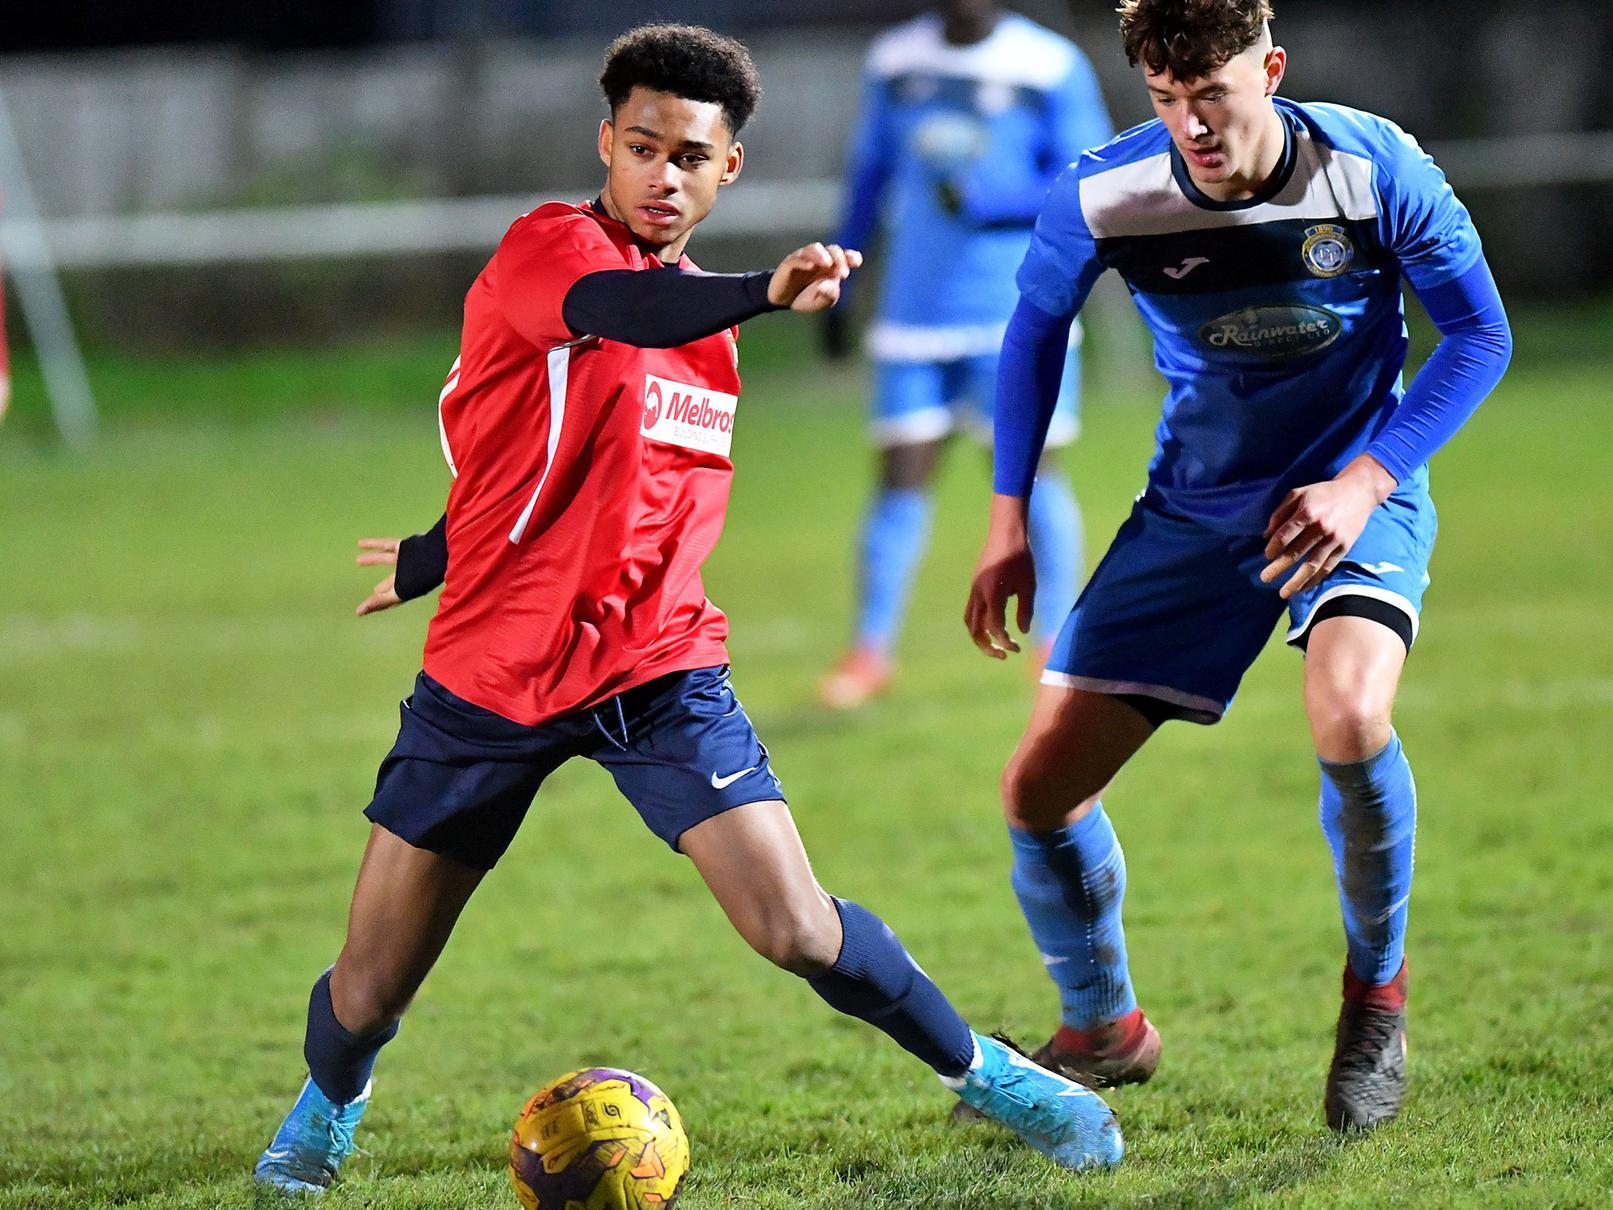 Academy Player Lewis Padmore got more game time